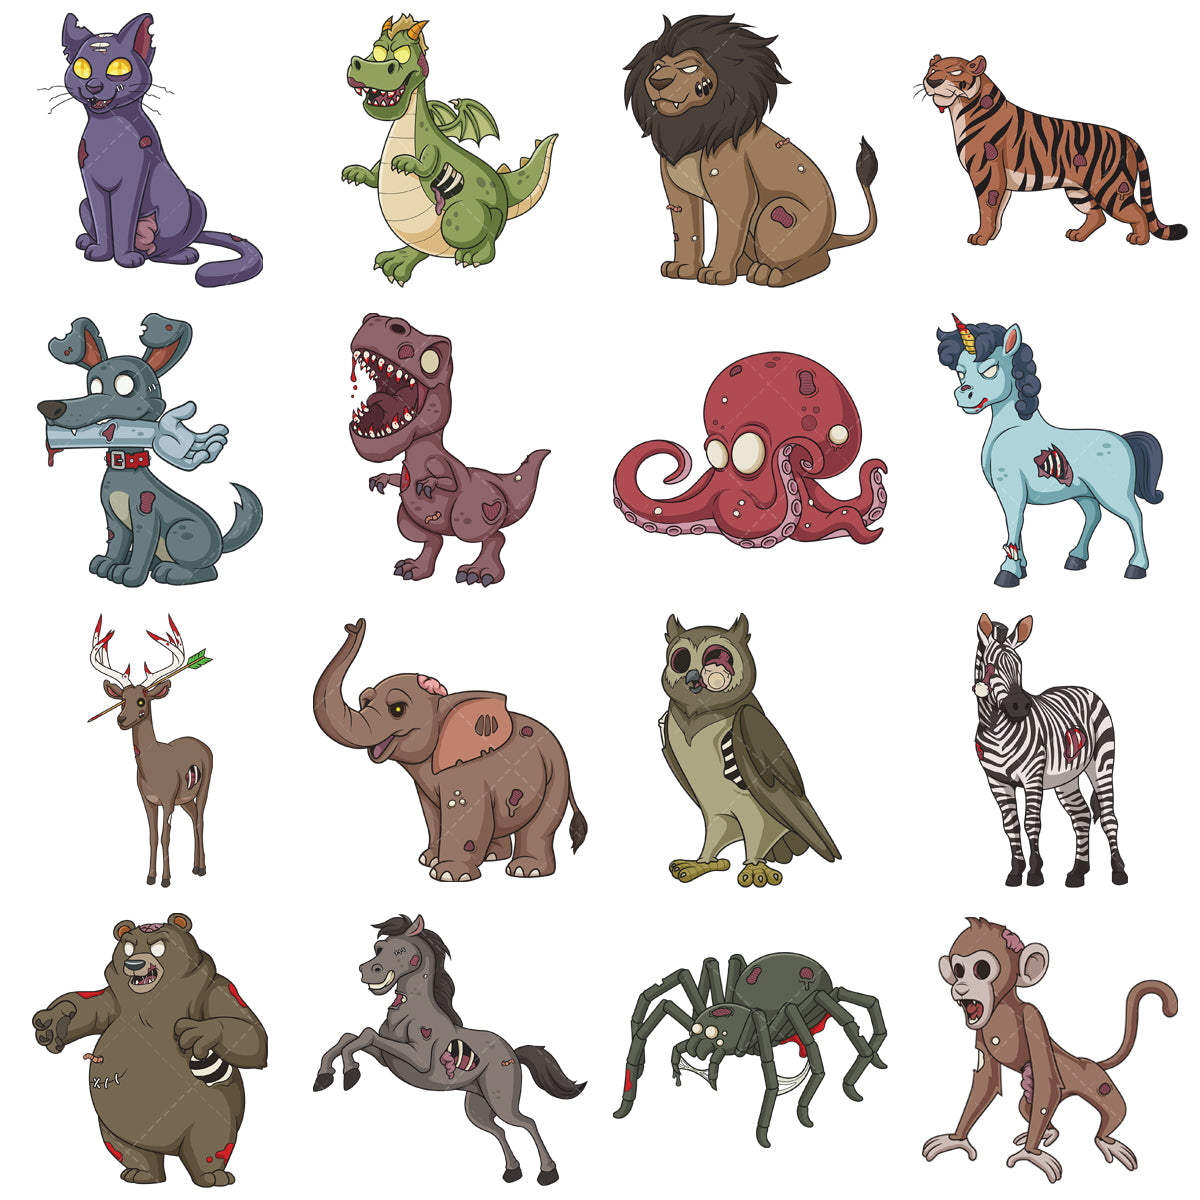 A bundle of 16 royalty-free stock vector illustrations of a creepy zombie animals.